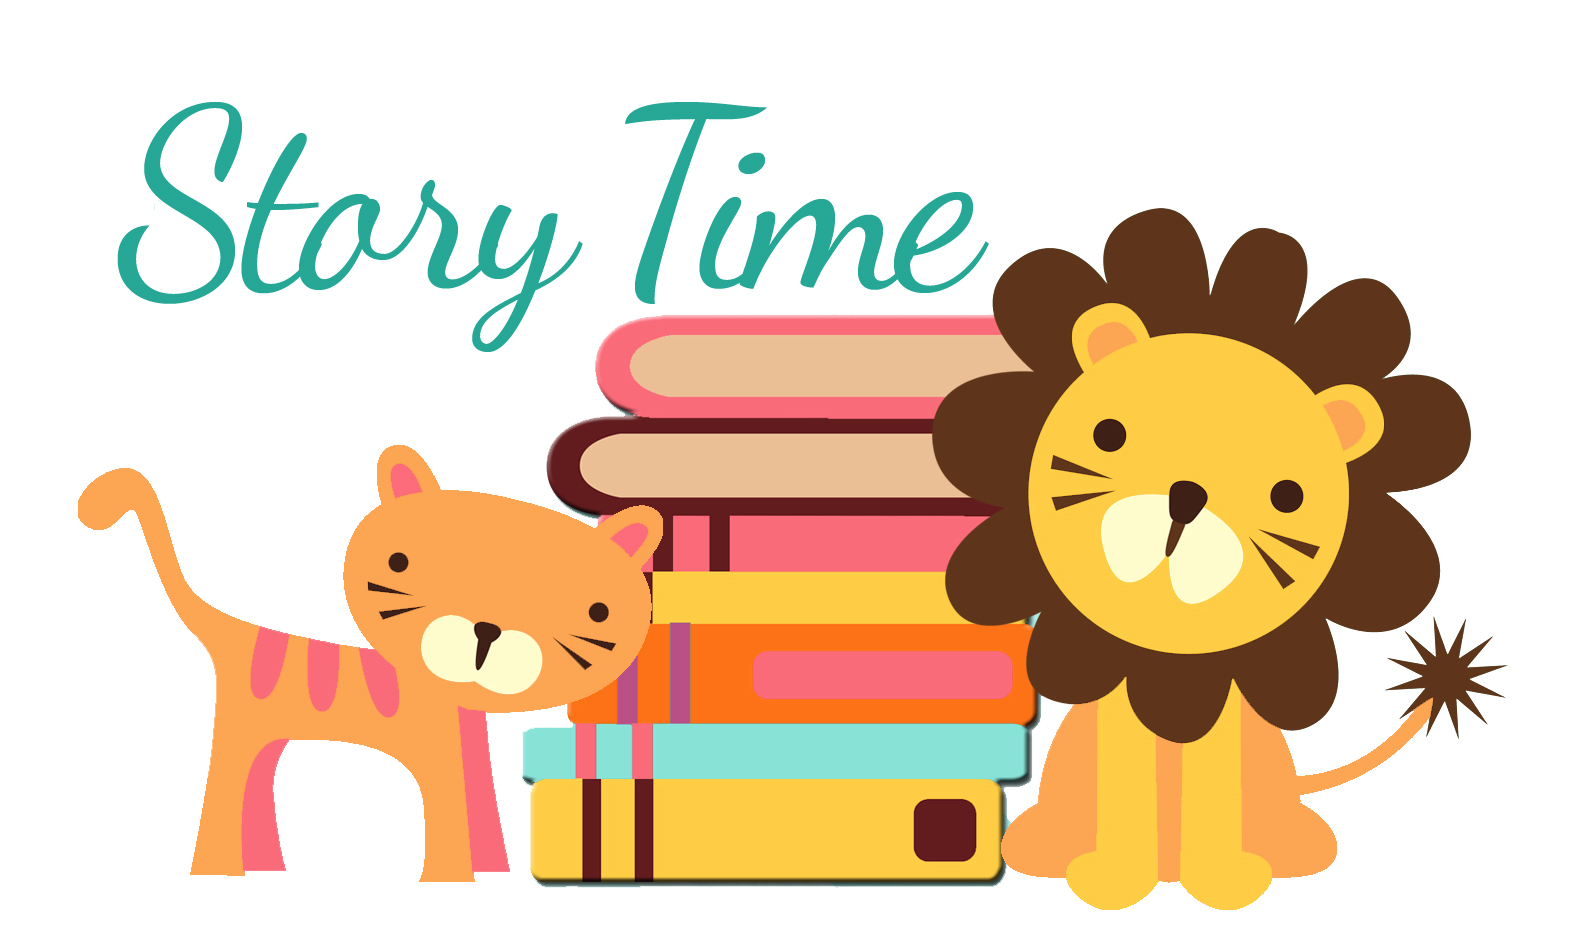 Storytime Clipart 